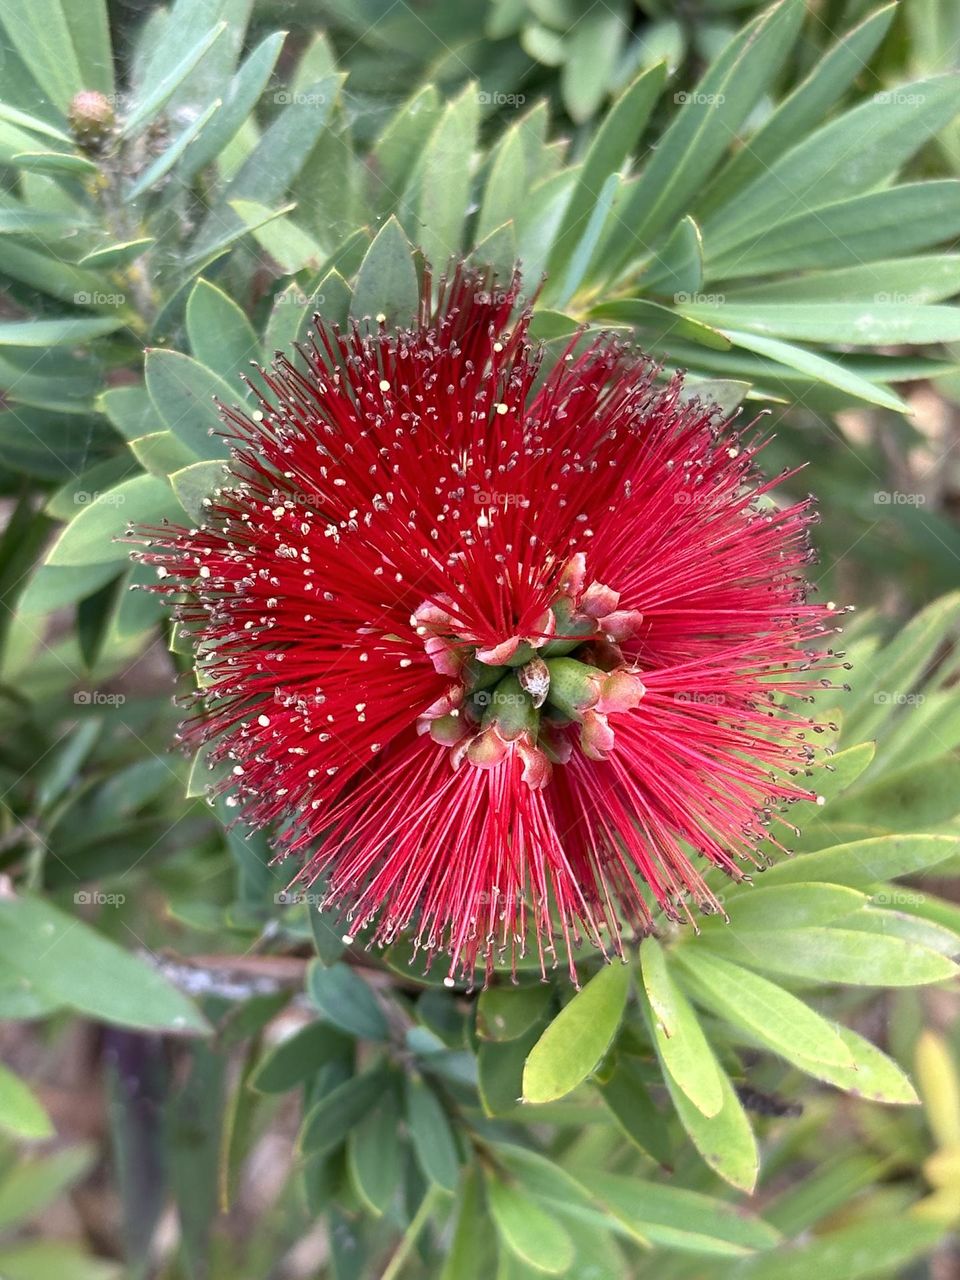 A close up view of the Crimson Bottlebrush surrounded by light green leaves is found along the street